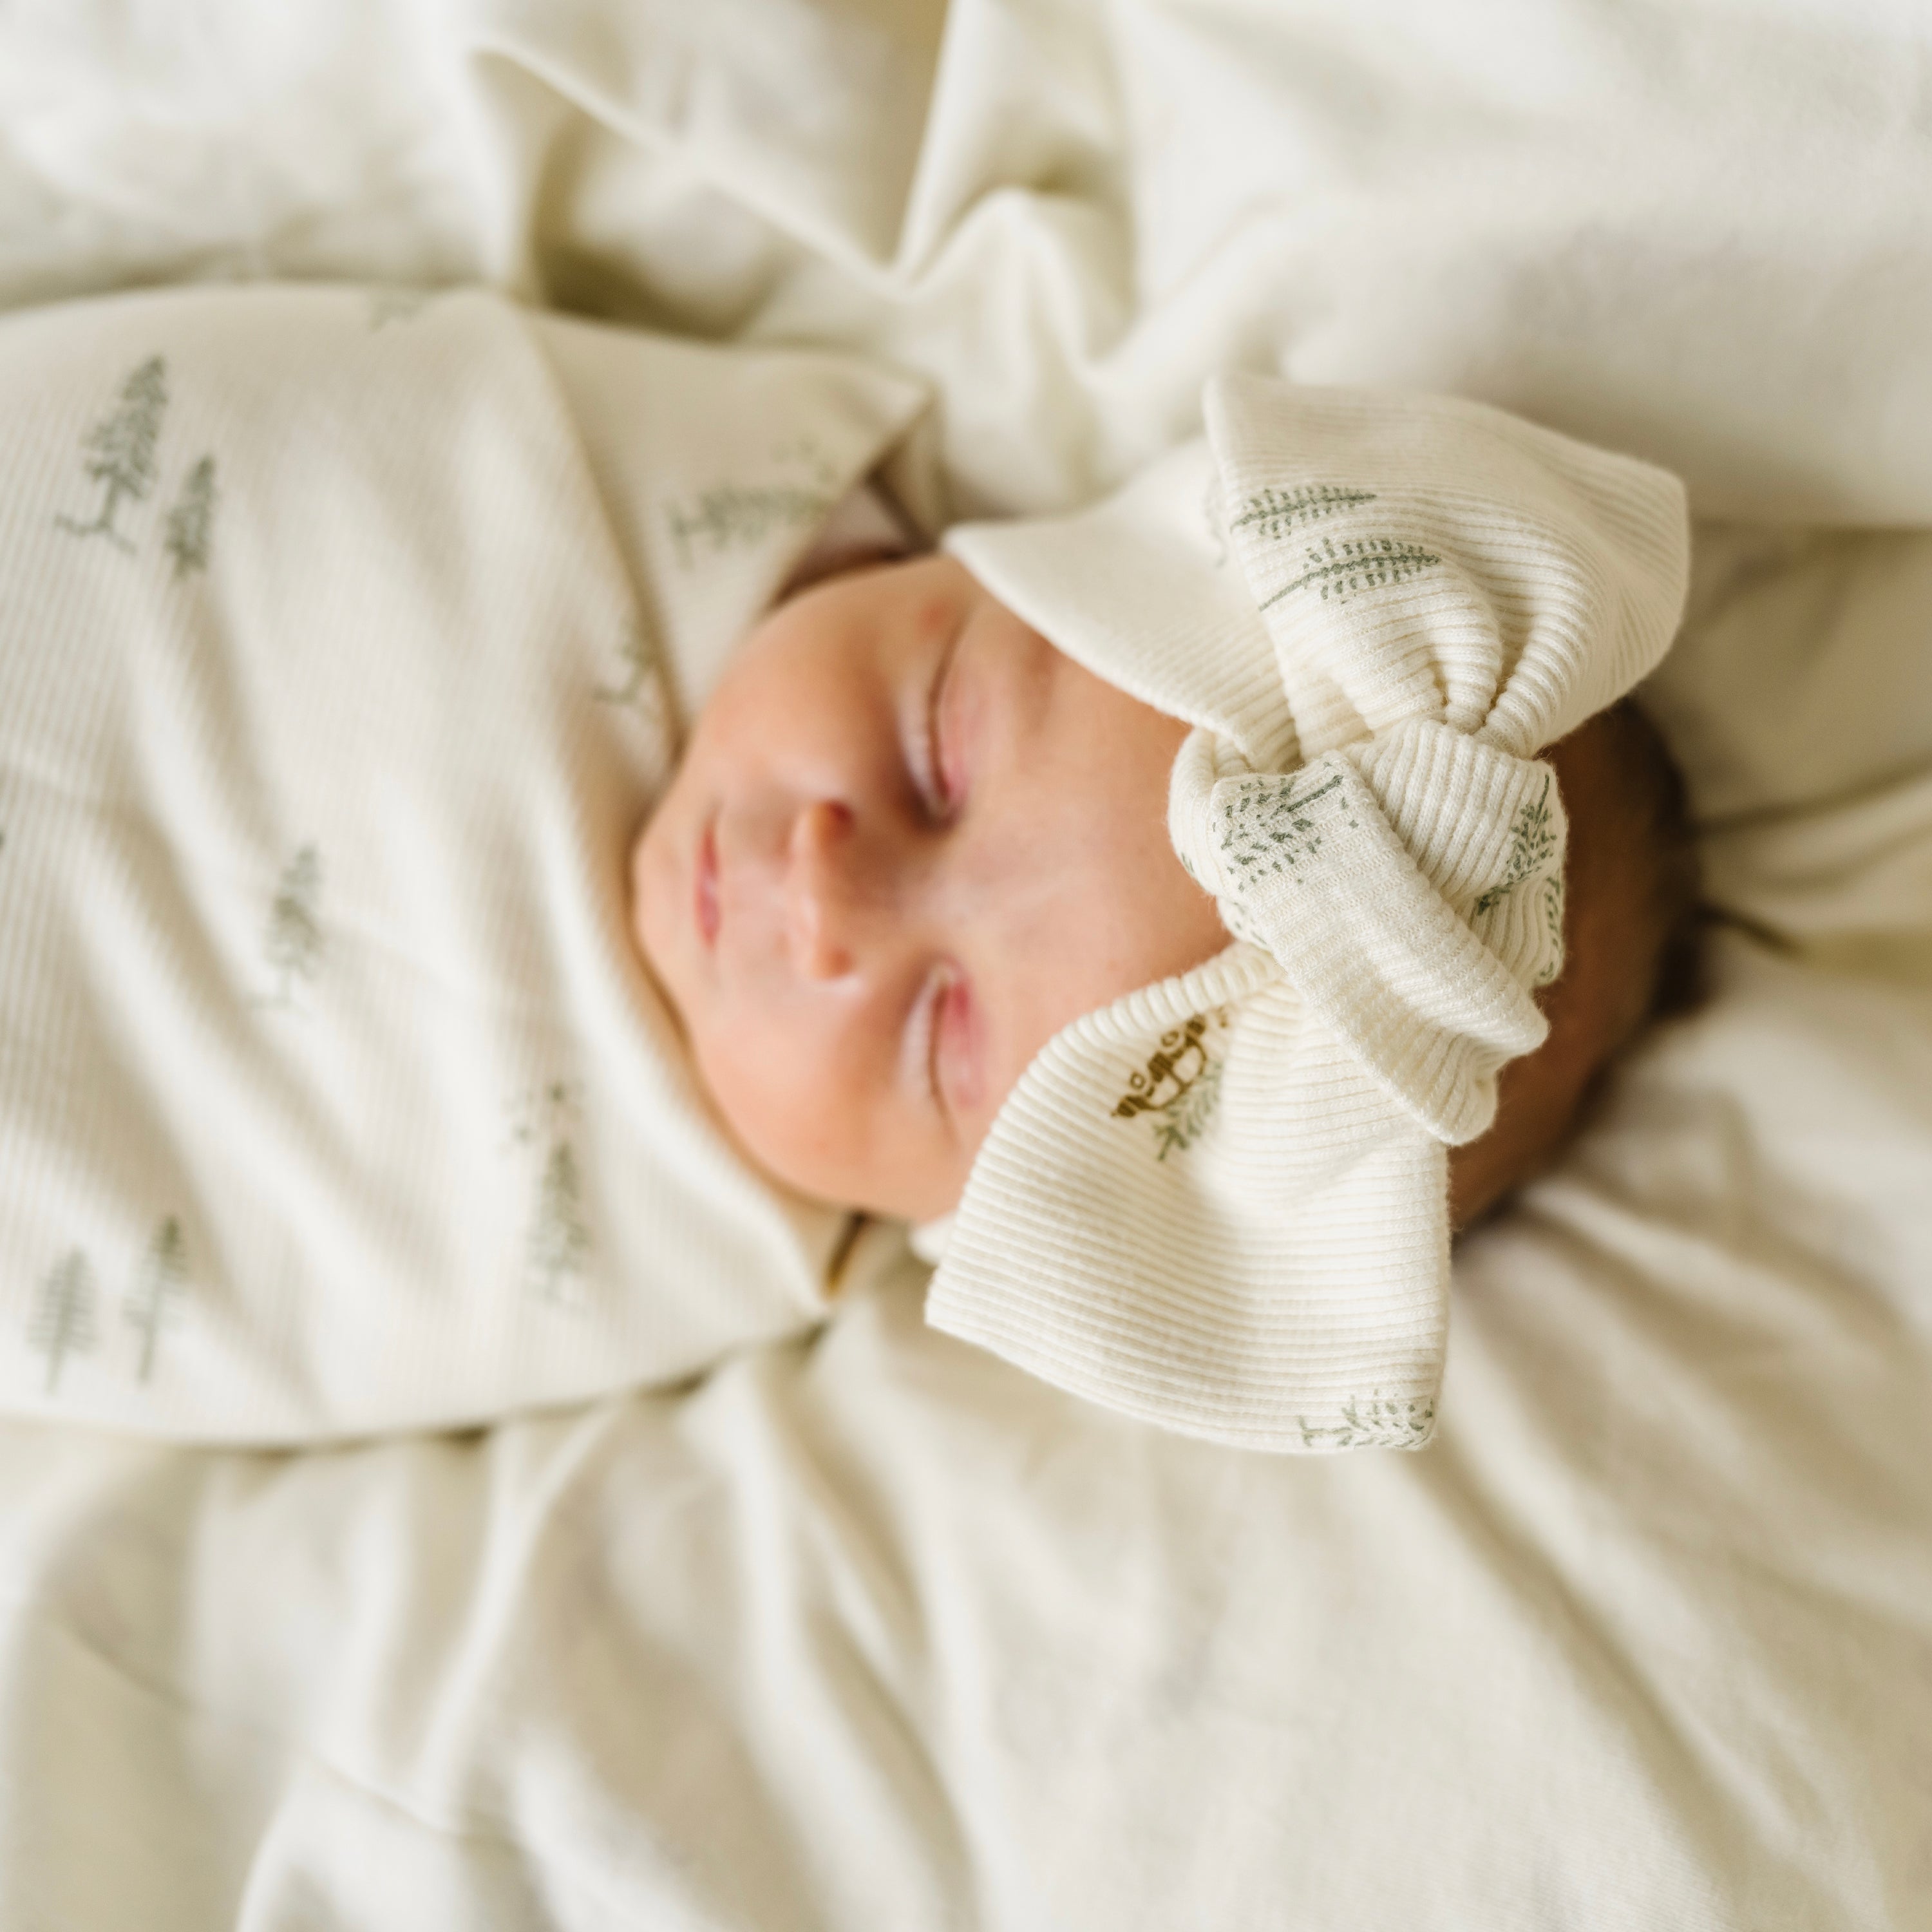 A newborn baby sleeps peacefully on a soft, light-colored Makemake Organics blanket, wearing a white onesie and a cute, knotted hat with leaf patterns. The baby is also bundled up in an Organic Headwrap from Wildwood & Evergreen Fir.